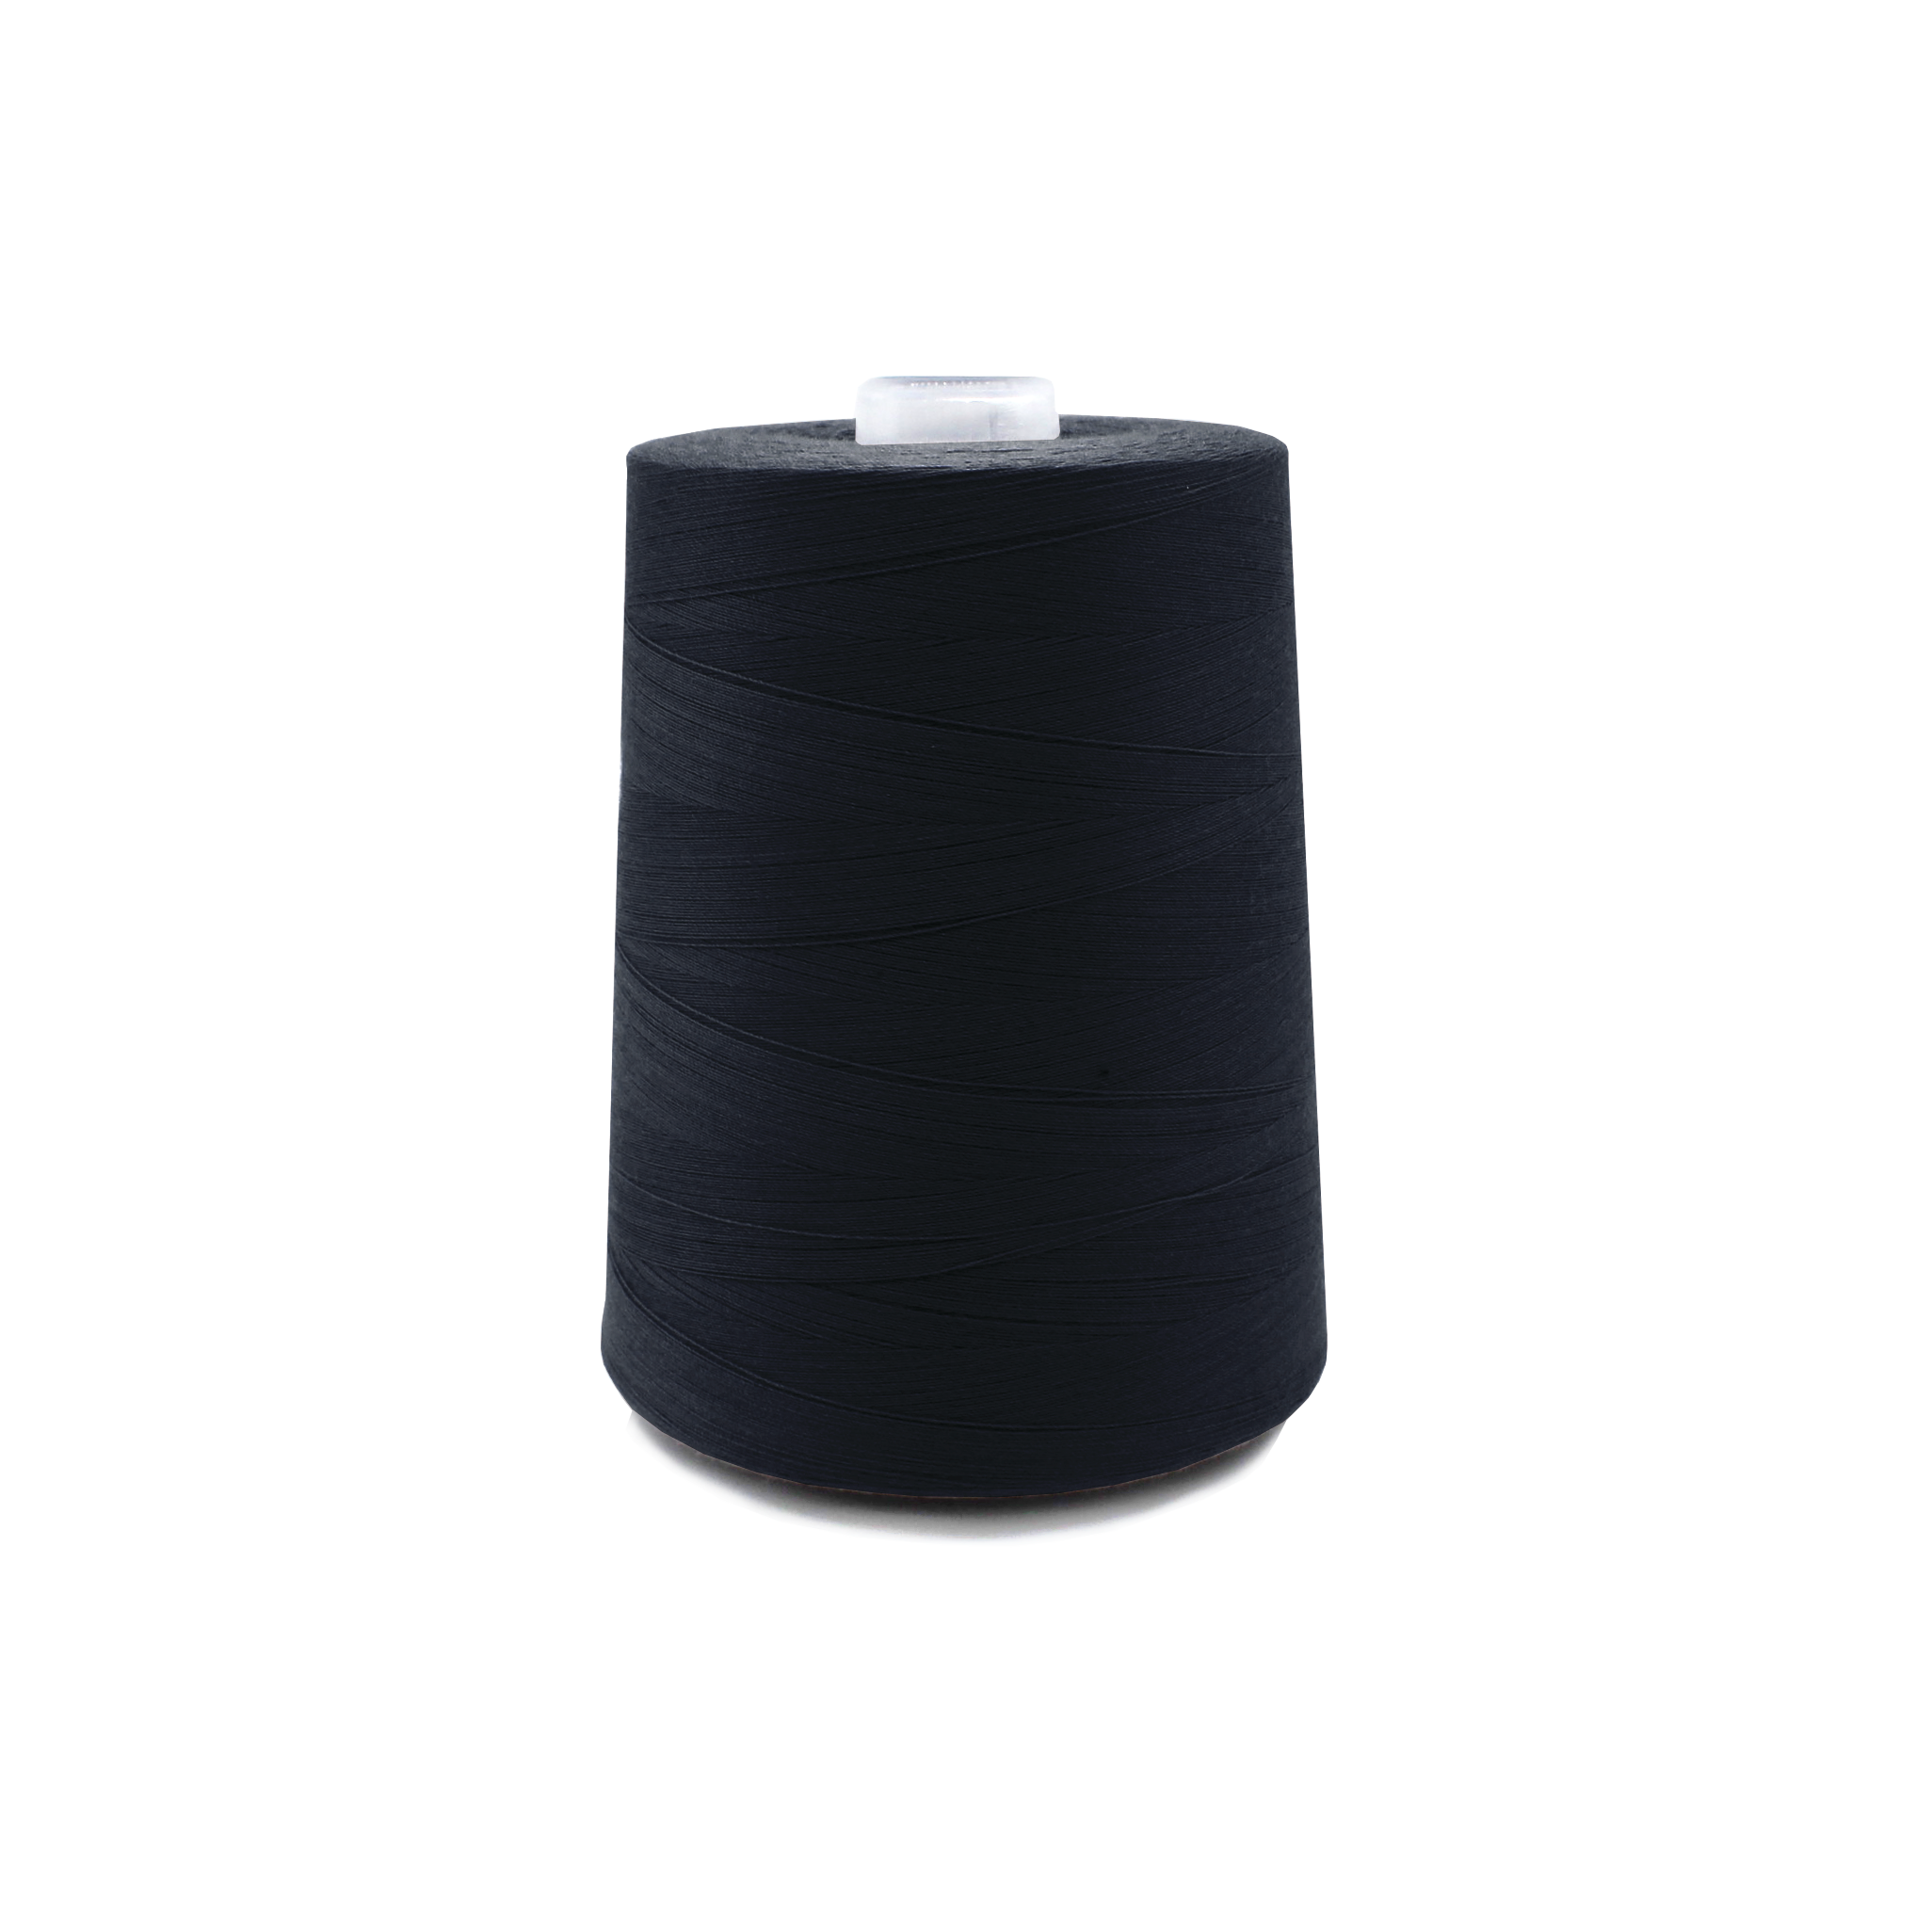 10 PCS Sewing Thread Cotton Black Cotton Thread 1000 Yards for Sewing  Machine